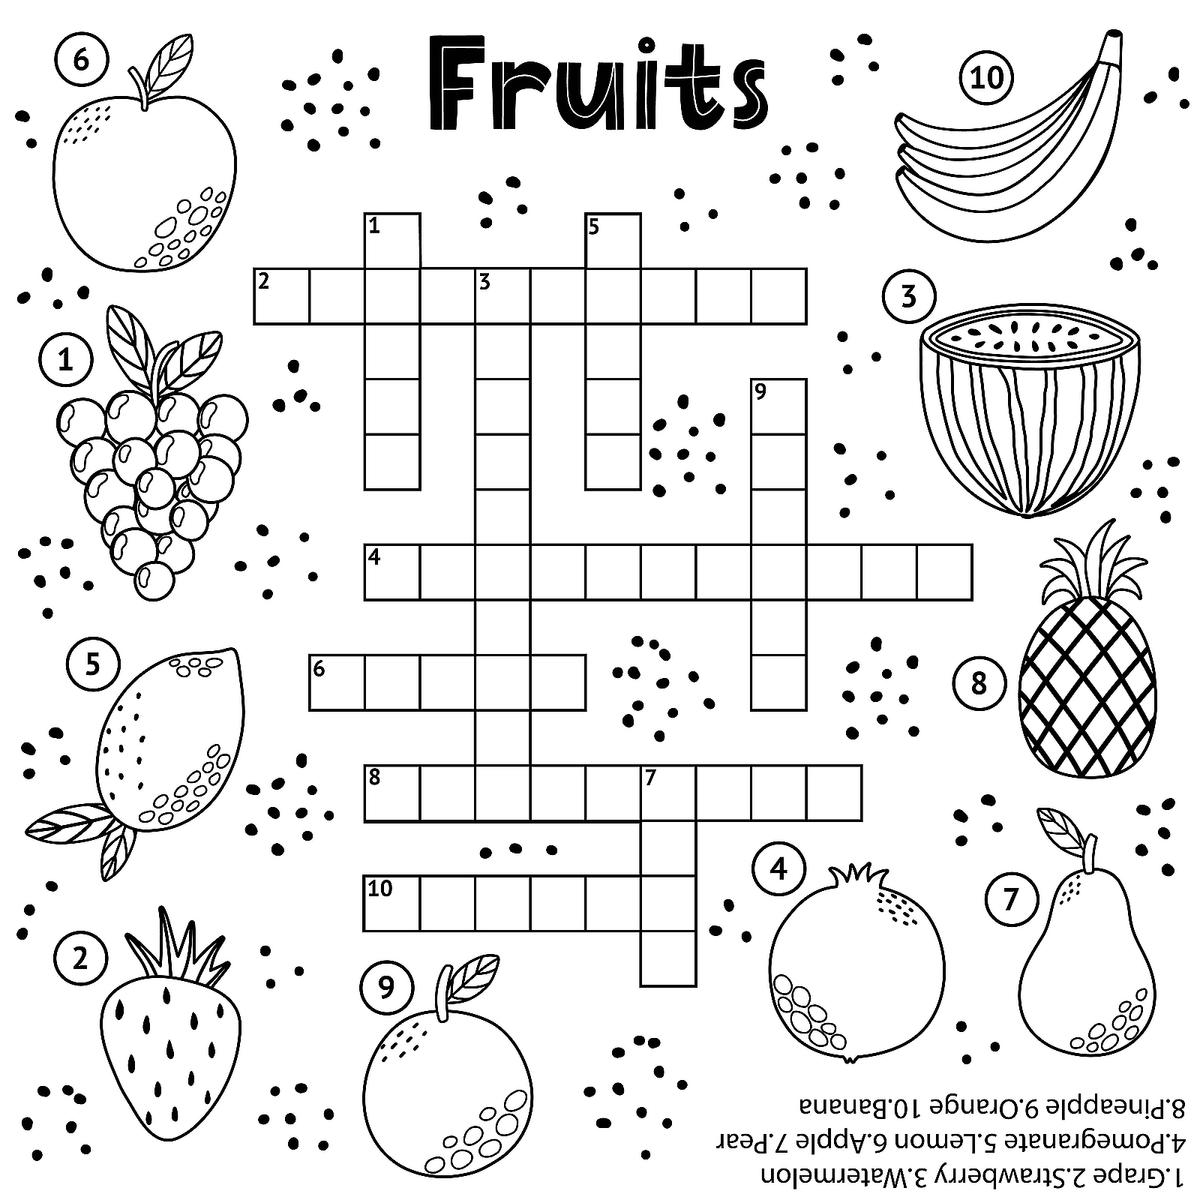 Crossword Puzzles For Kids Fun Free Printable Crossword Puzzle Coloring Page Activities For Children Printables 30Seconds Mom